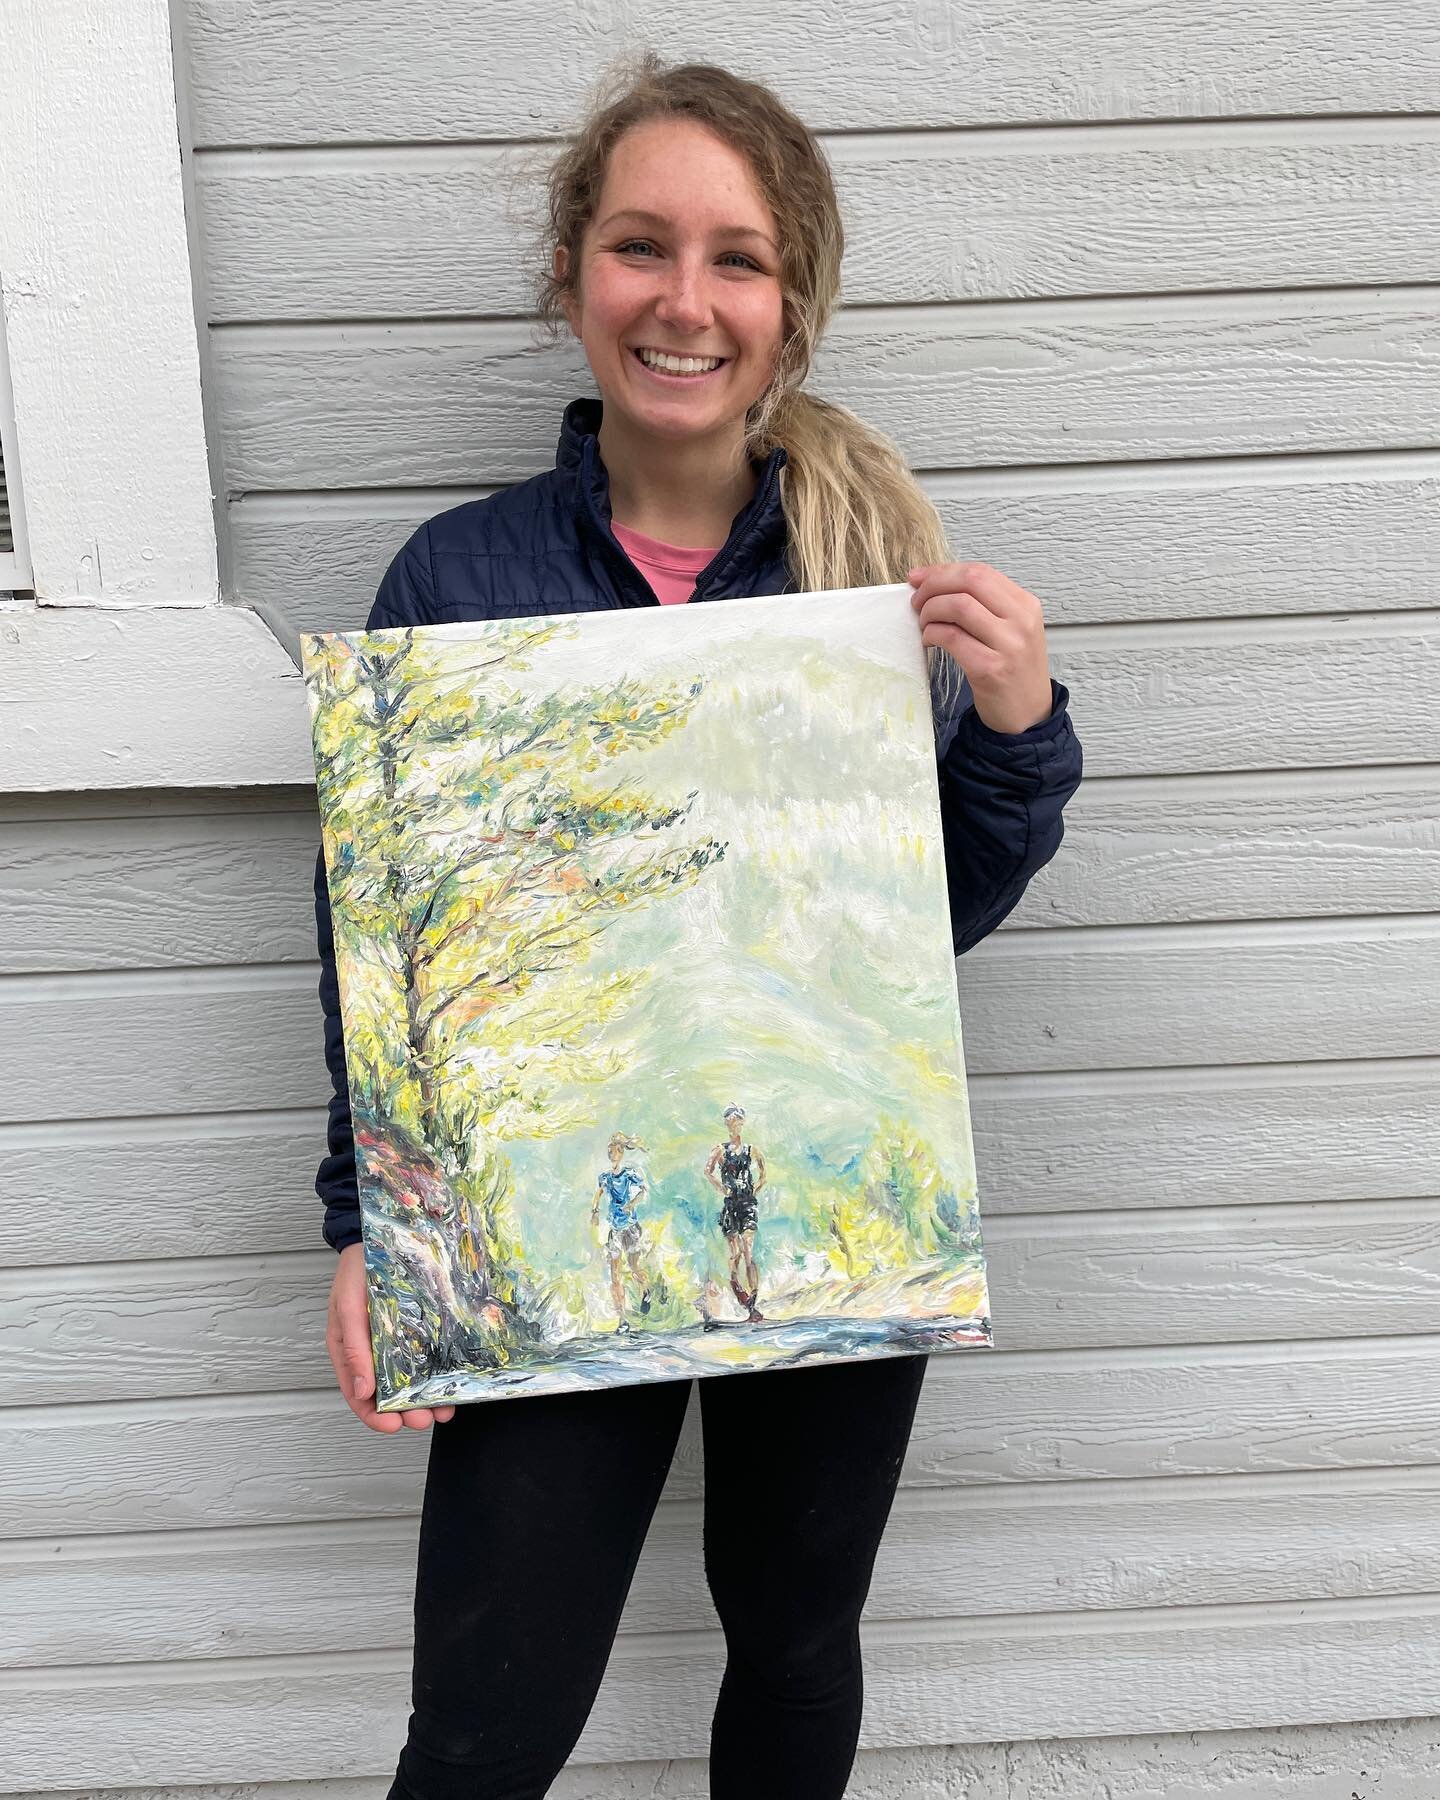 My 10 favorite paintings in my inventory right now, 25% off today ✨✨ 

Let me know if you want to buy one!

1. &ldquo;Morning Run in Auburn&rdquo;, 20 x 16 inches, Oil on Canvas, 25% off $125 = $93.75
2. &ldquo;Walk with the Divine&rdquo;, 48 x 36 in